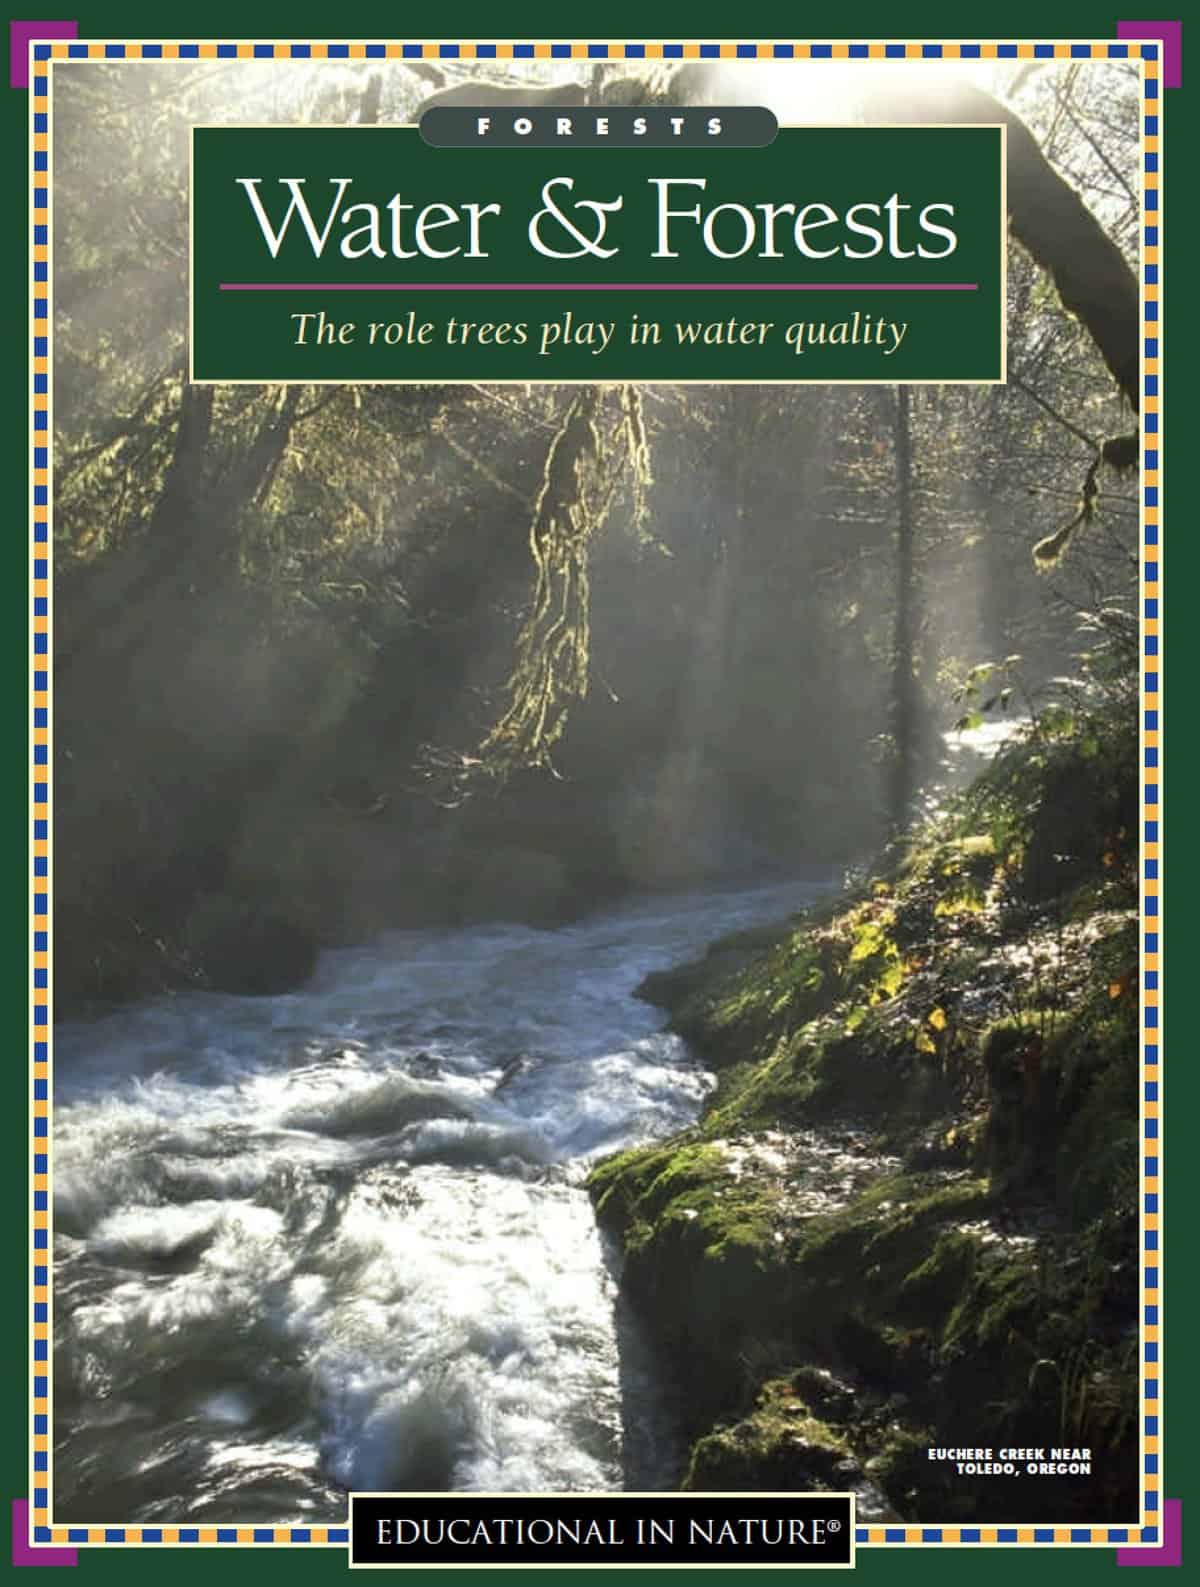 photo: cover of USDA publication about Water and Forests